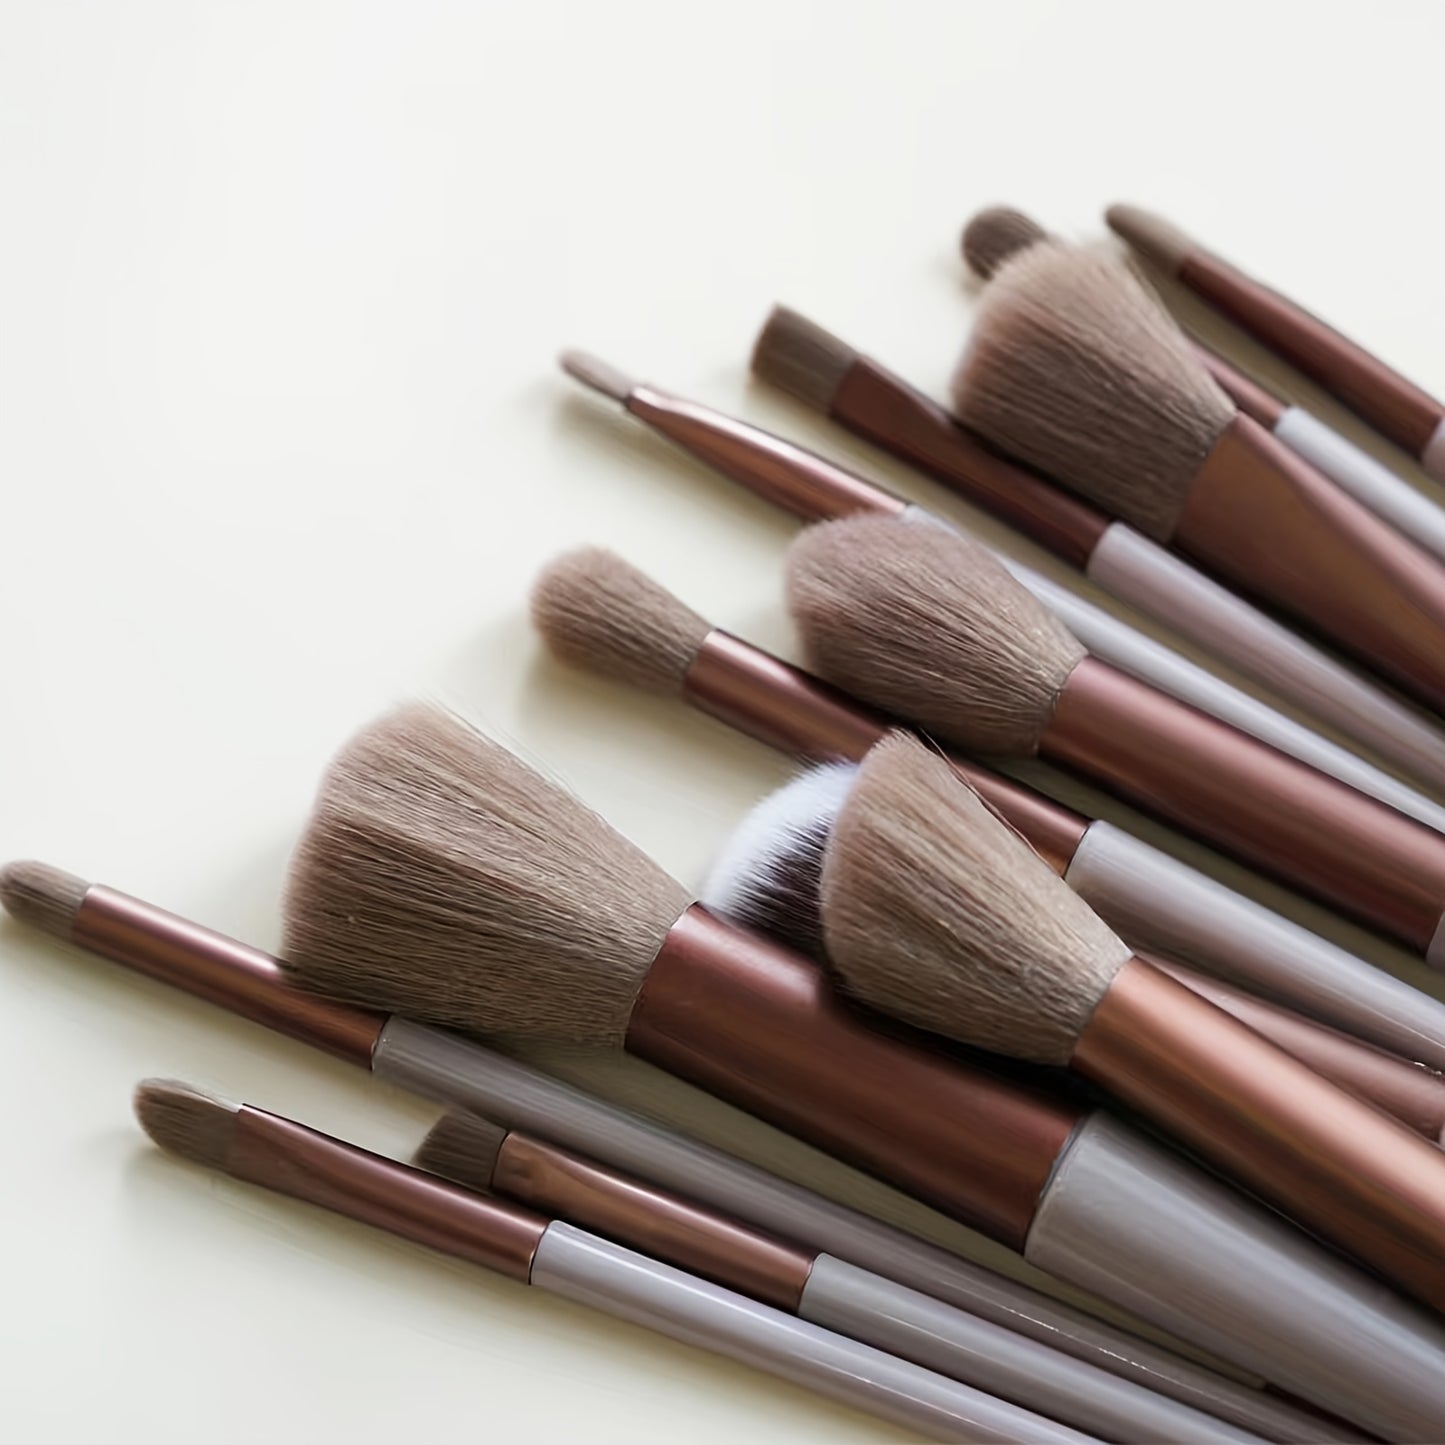 13-Piece Professional Makeup Brush Set: Essential Tools for Eyeshadow, Blush, and More